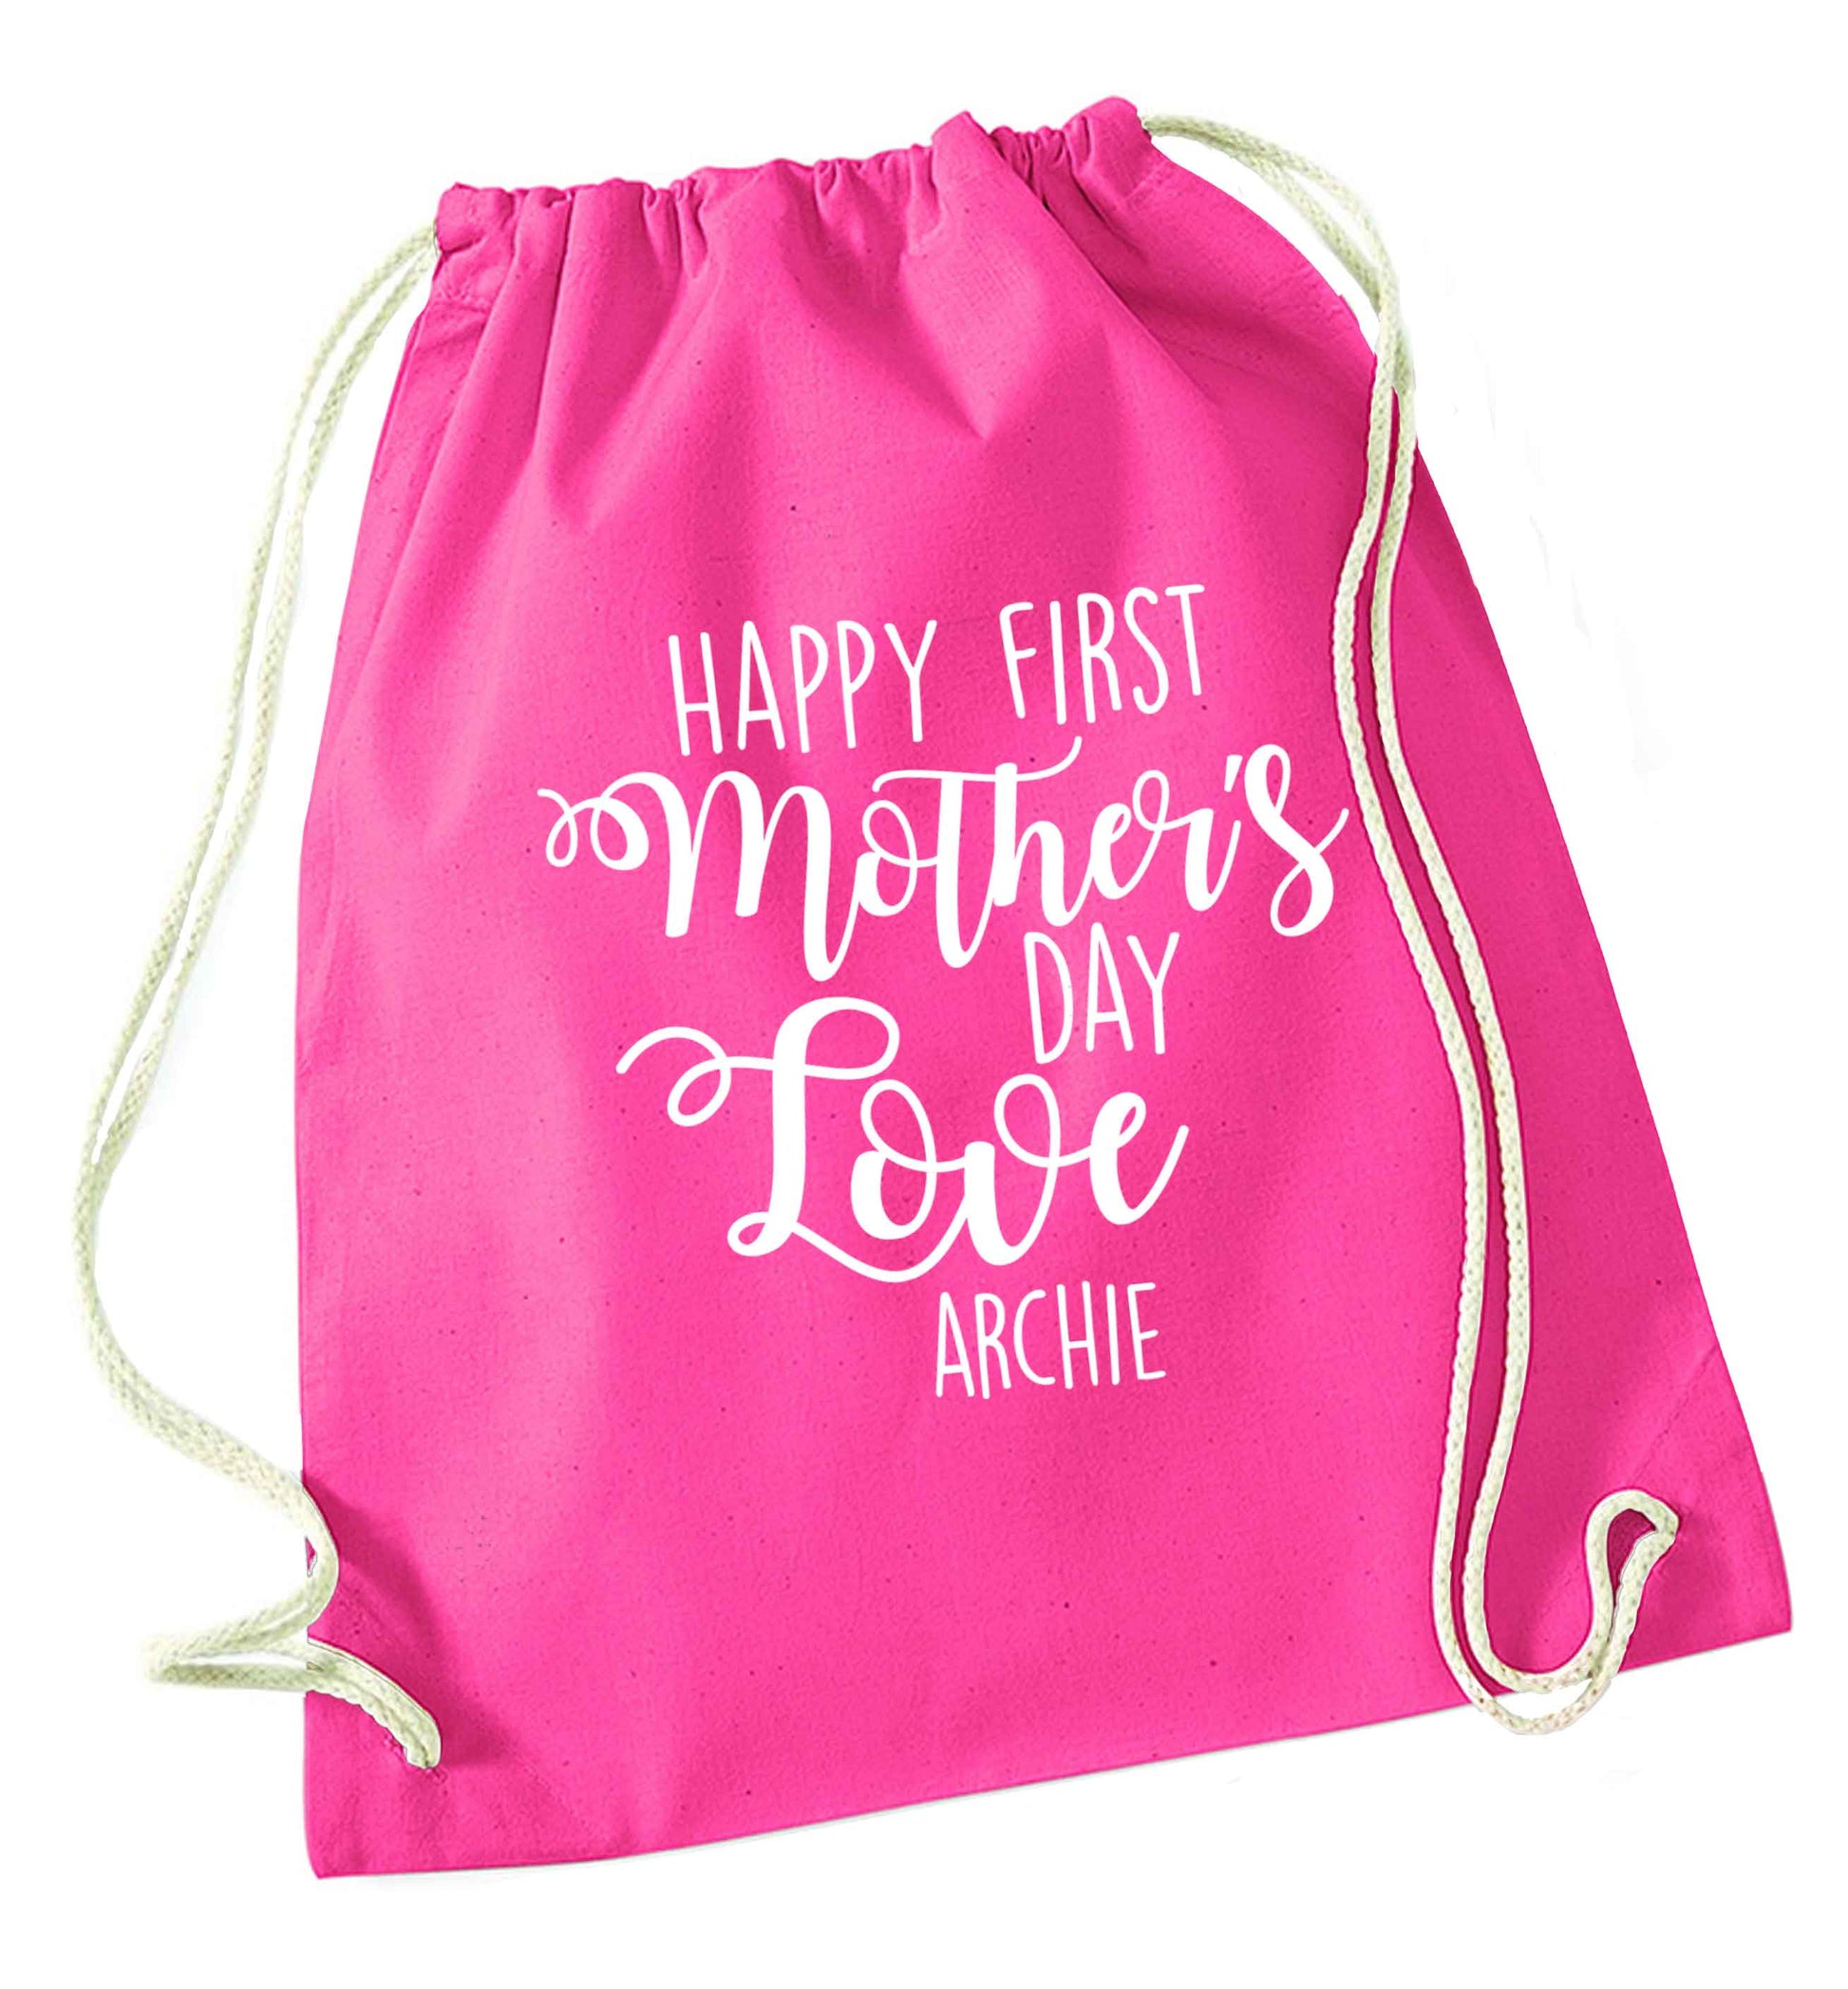 Mummy's first mother's day! pink drawstring bag